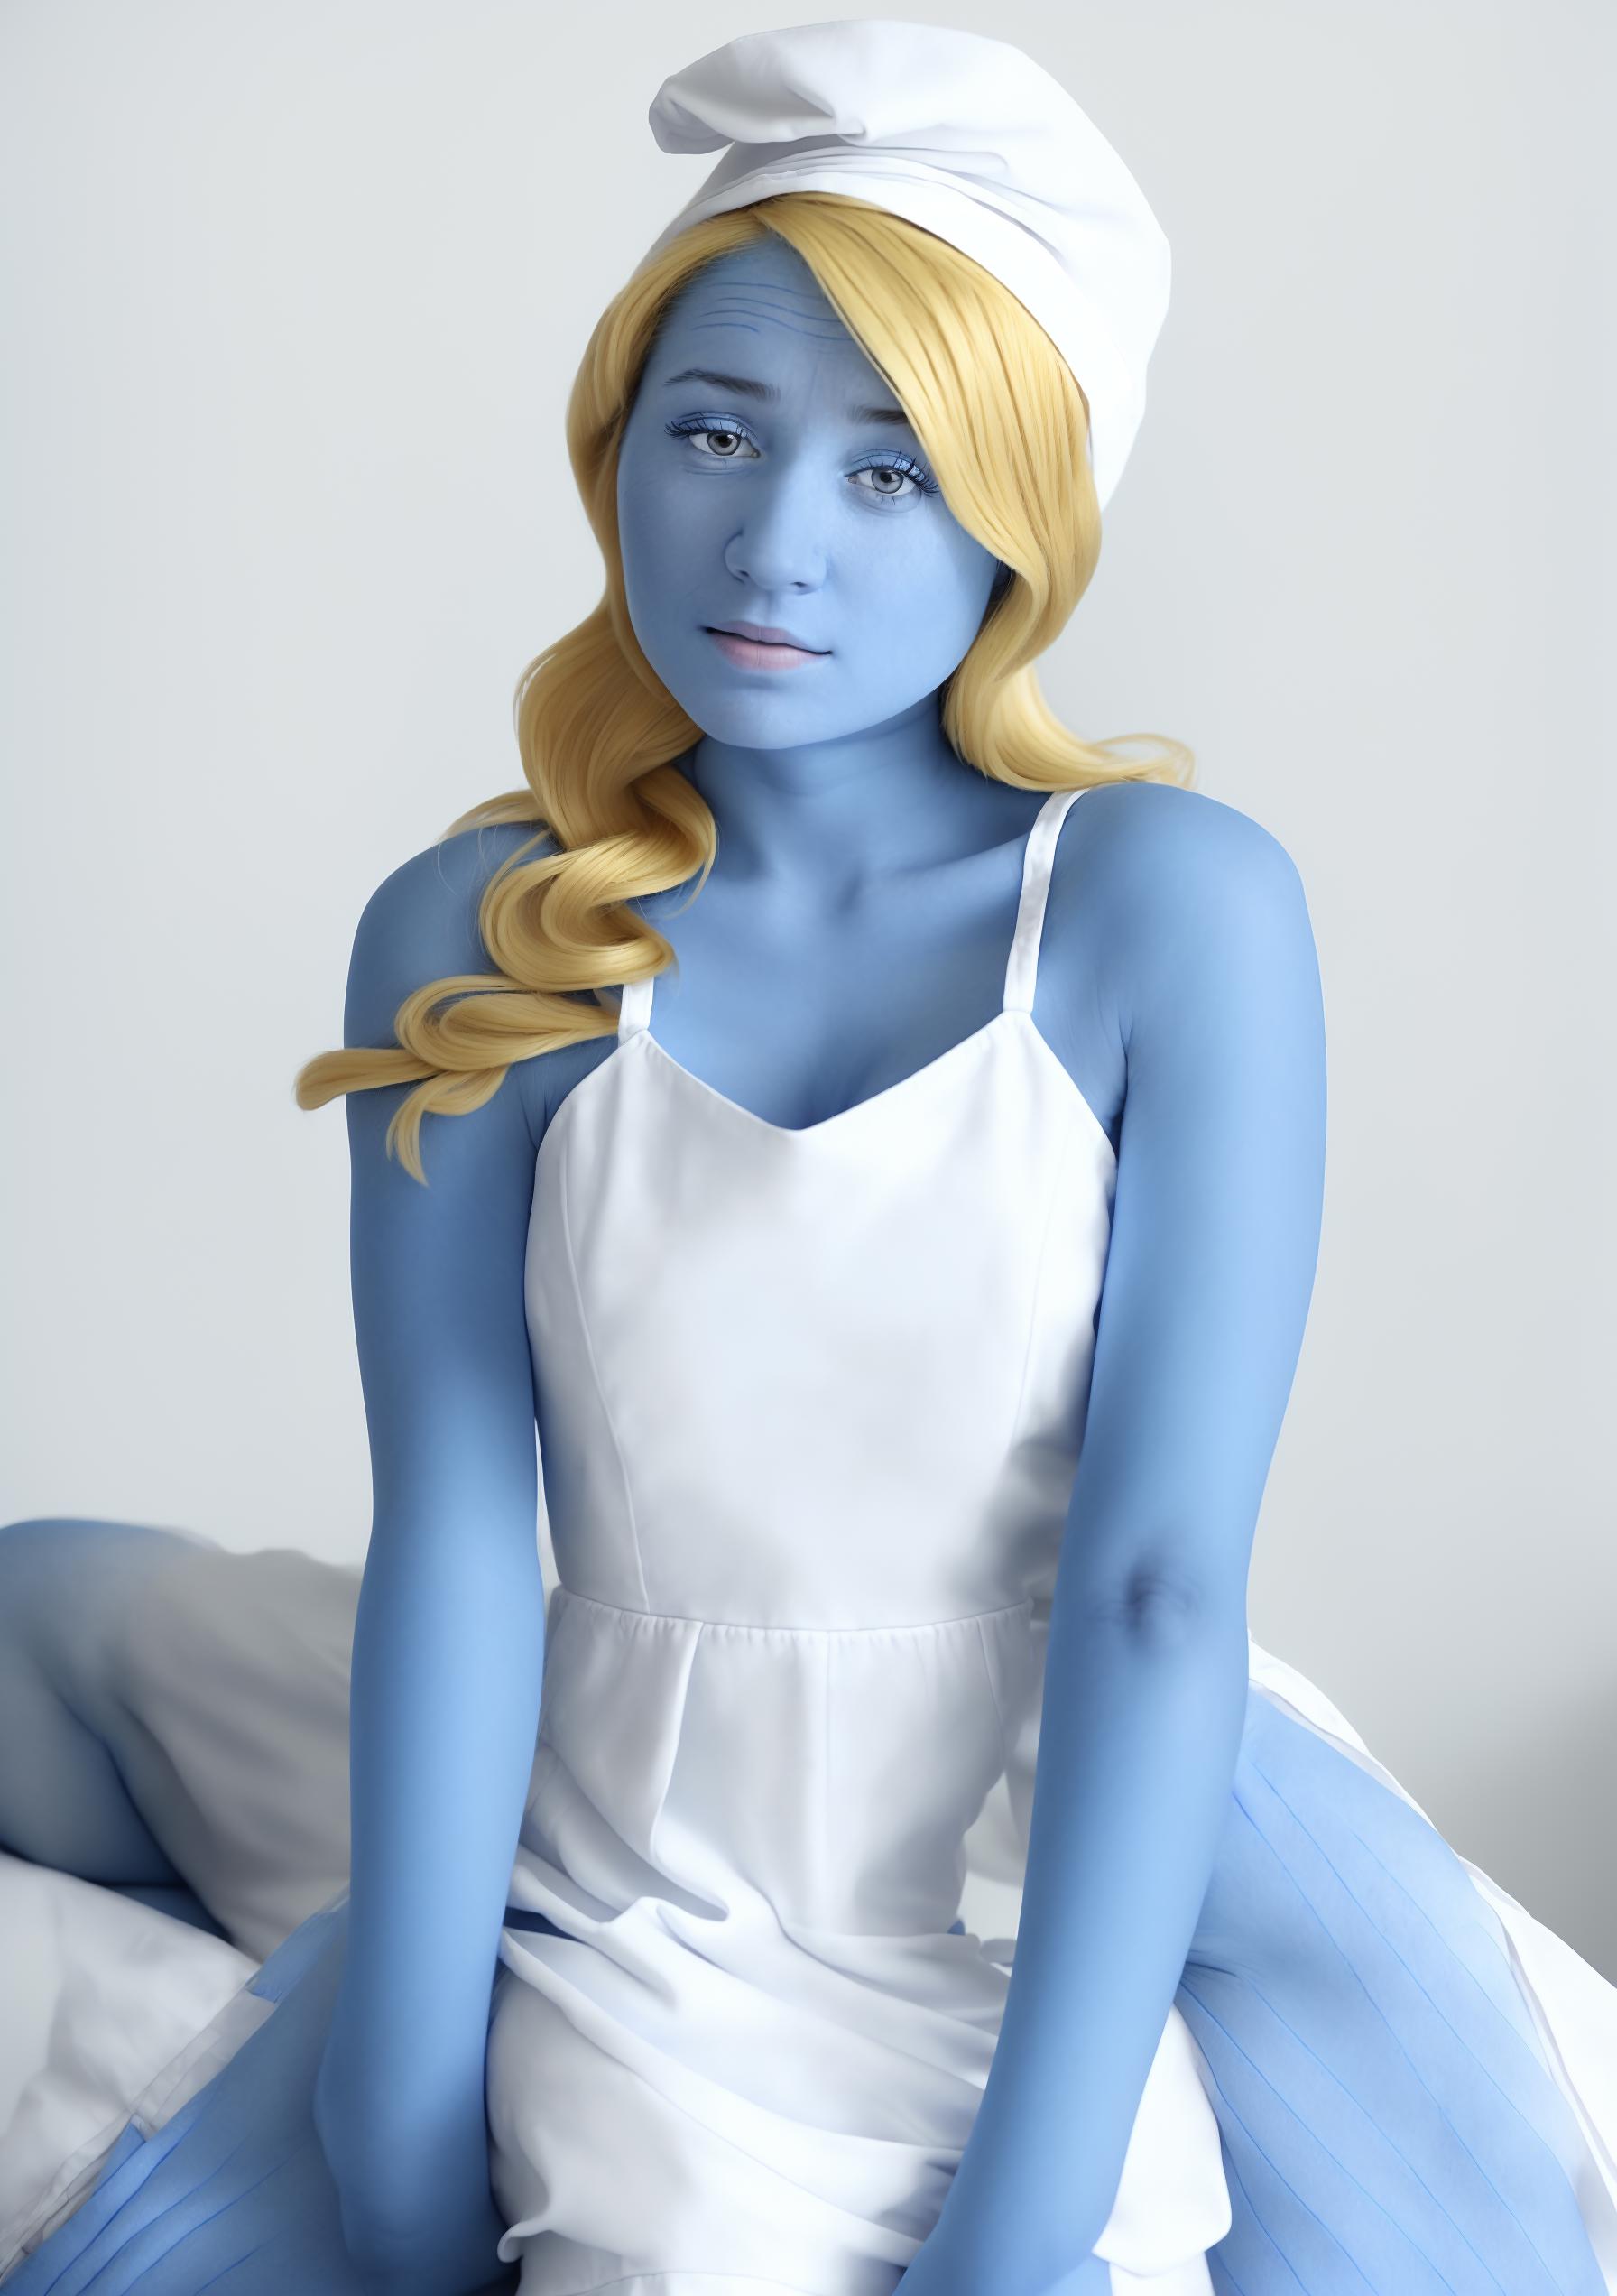 Smurf 蓝精灵 image by mikiew